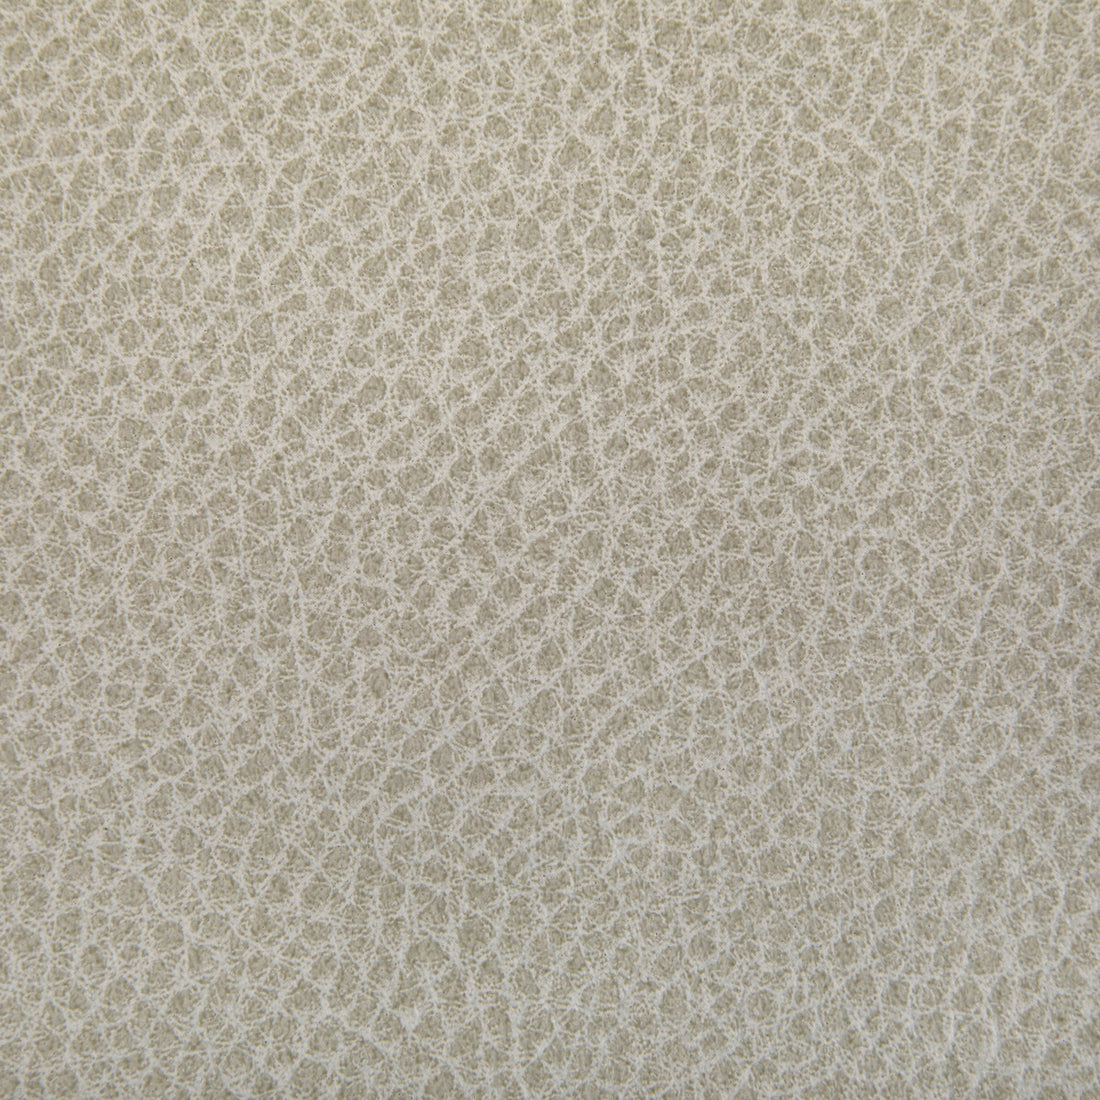 Woolf fabric in limestone color - pattern WOOLF.1.0 - by Kravet Contract